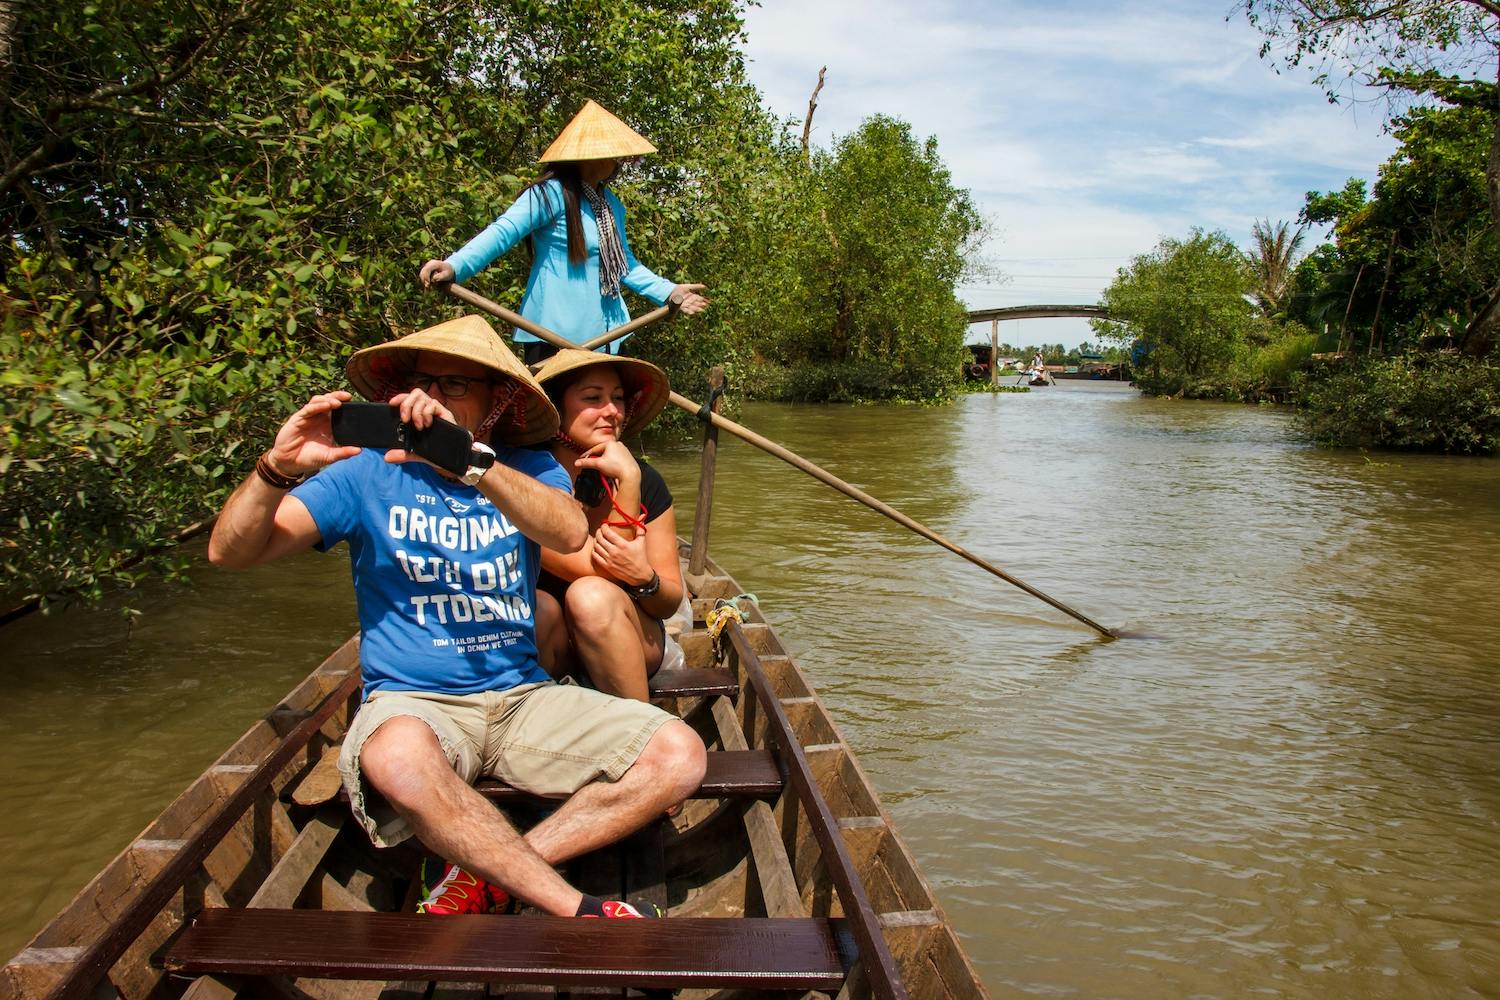 Mekong Delta and Ben Tre Coconut Village tour from HCMC Port